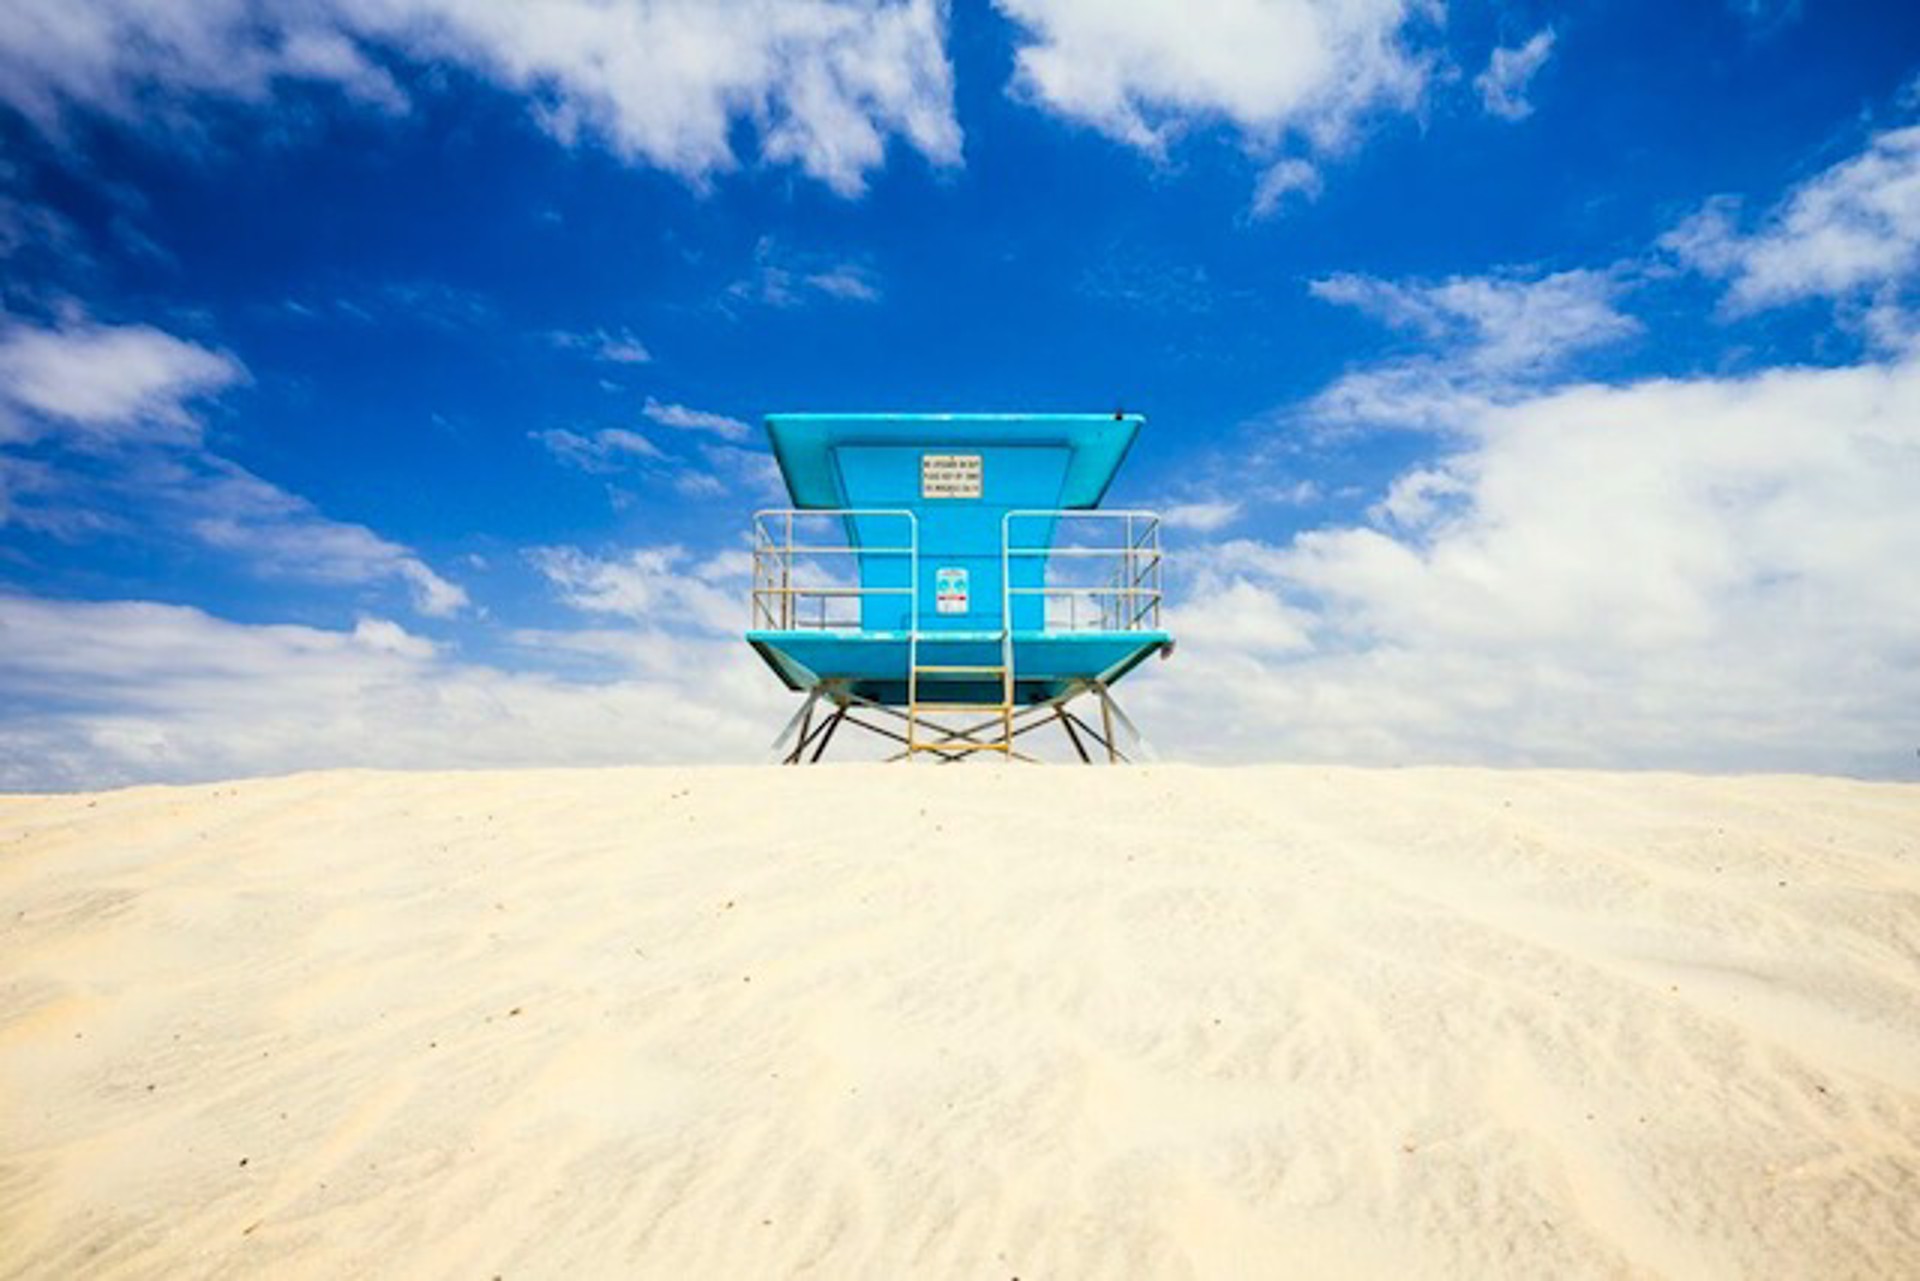 Coronado Lifeguard Stand by Peter Mendelson